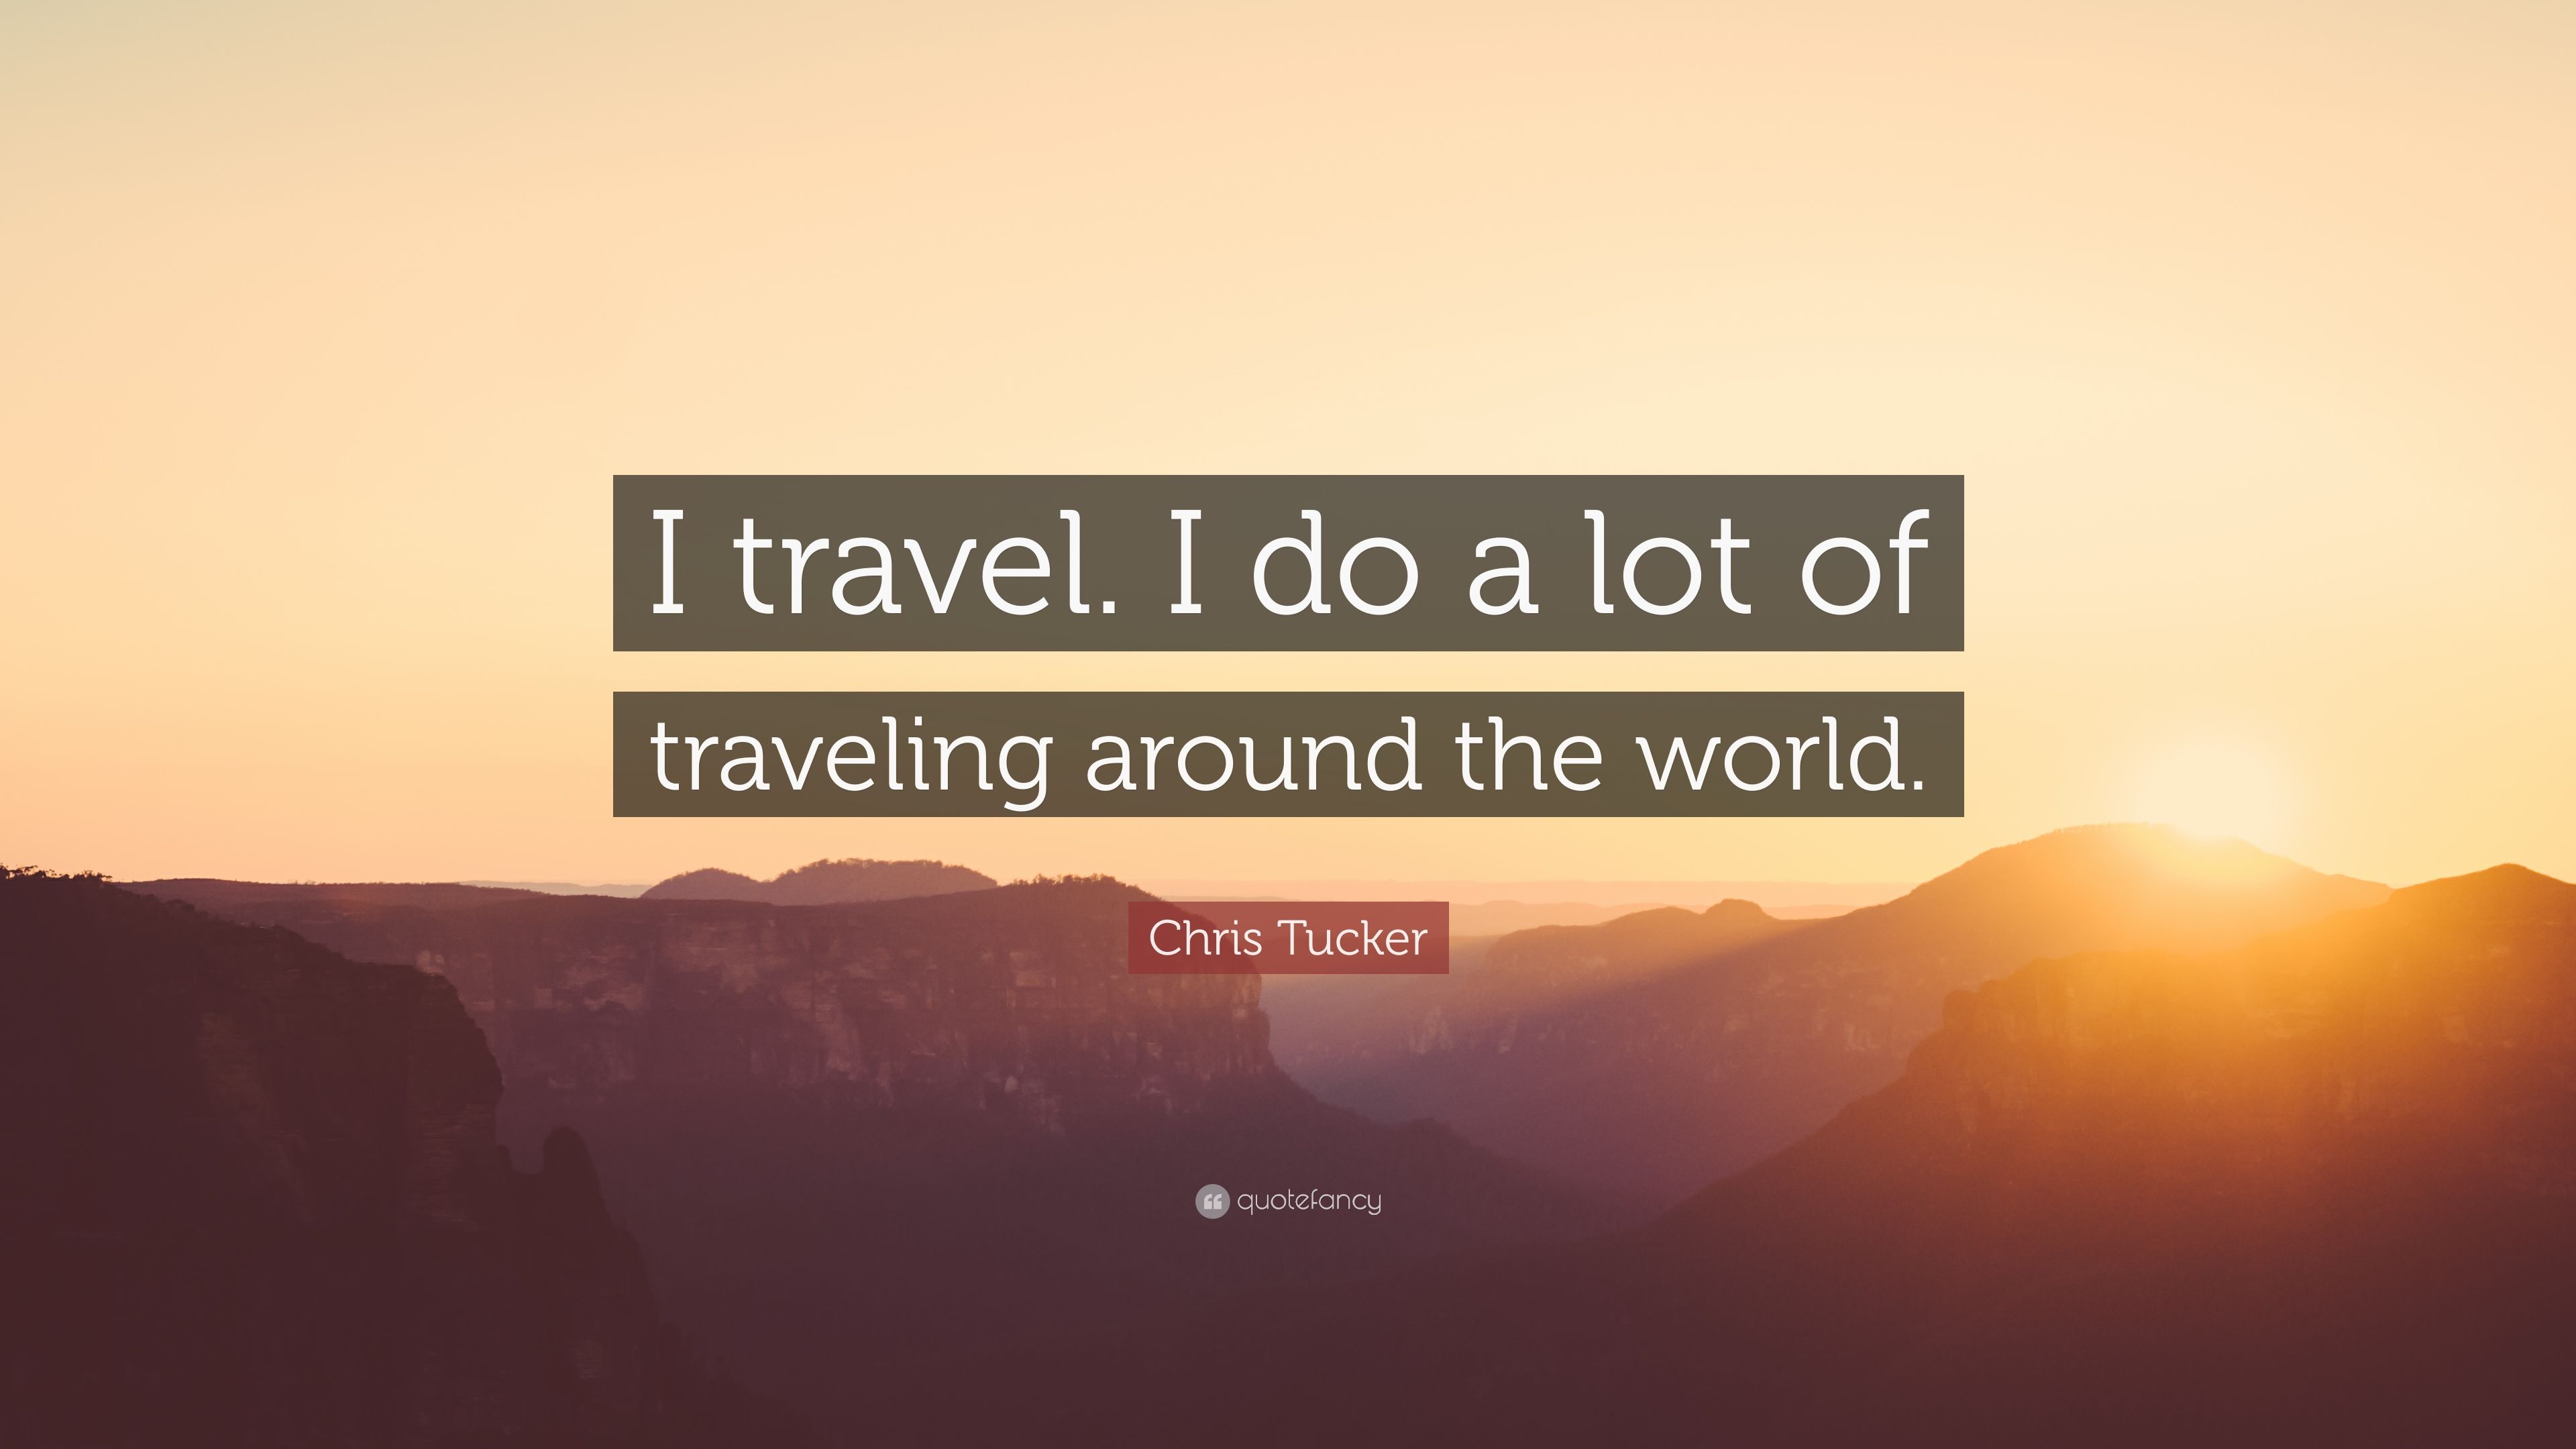 Chris Tucker Quote: “I travel. I do a lot of traveling around